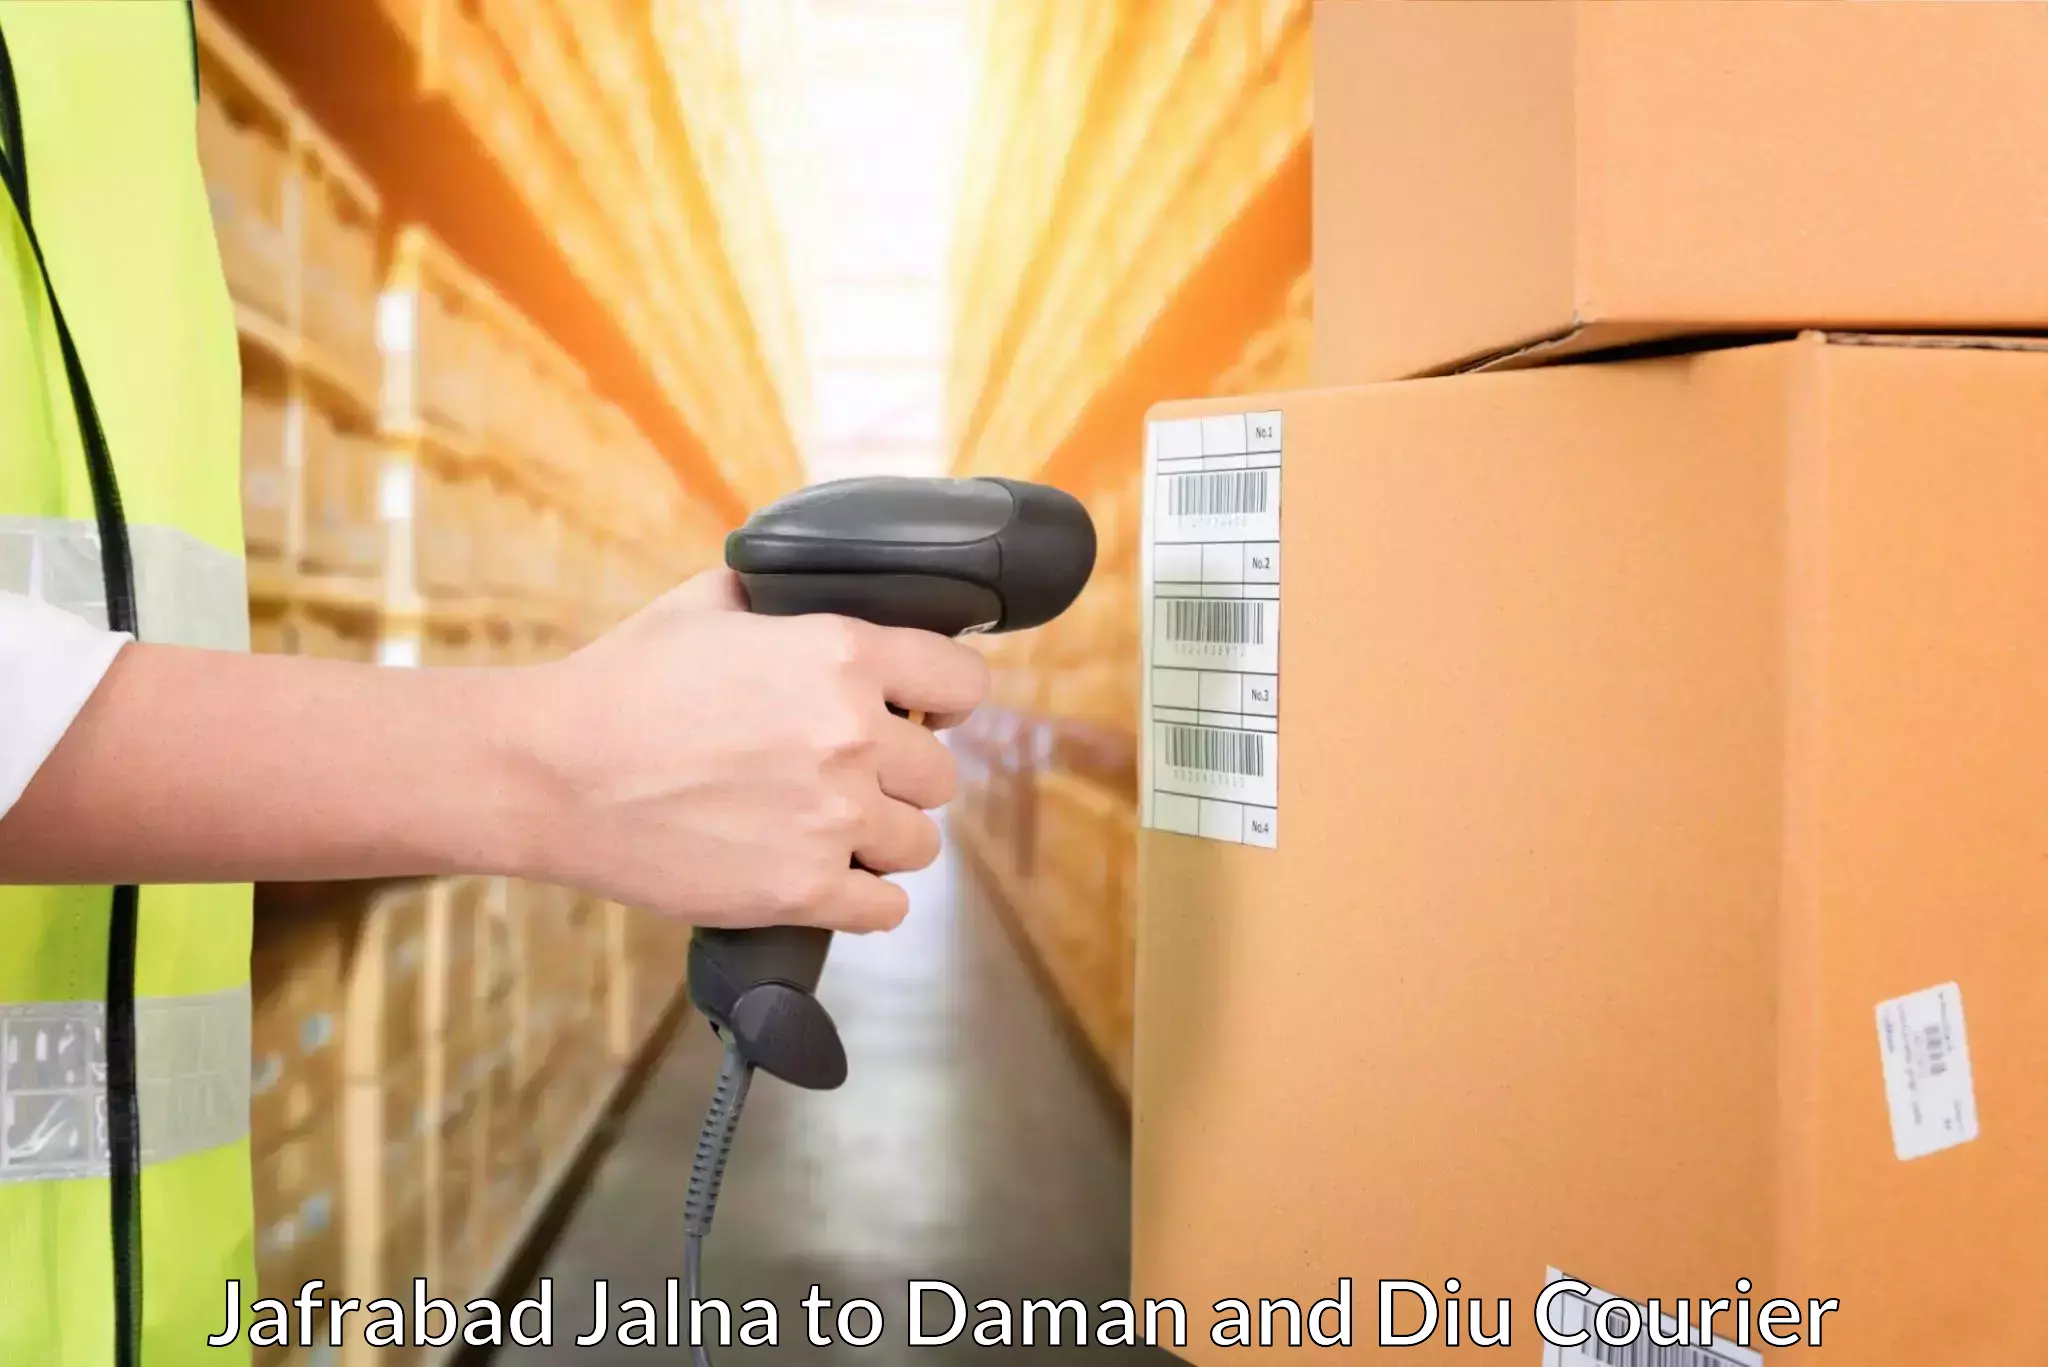 Fast-track shipping solutions Jafrabad Jalna to Diu